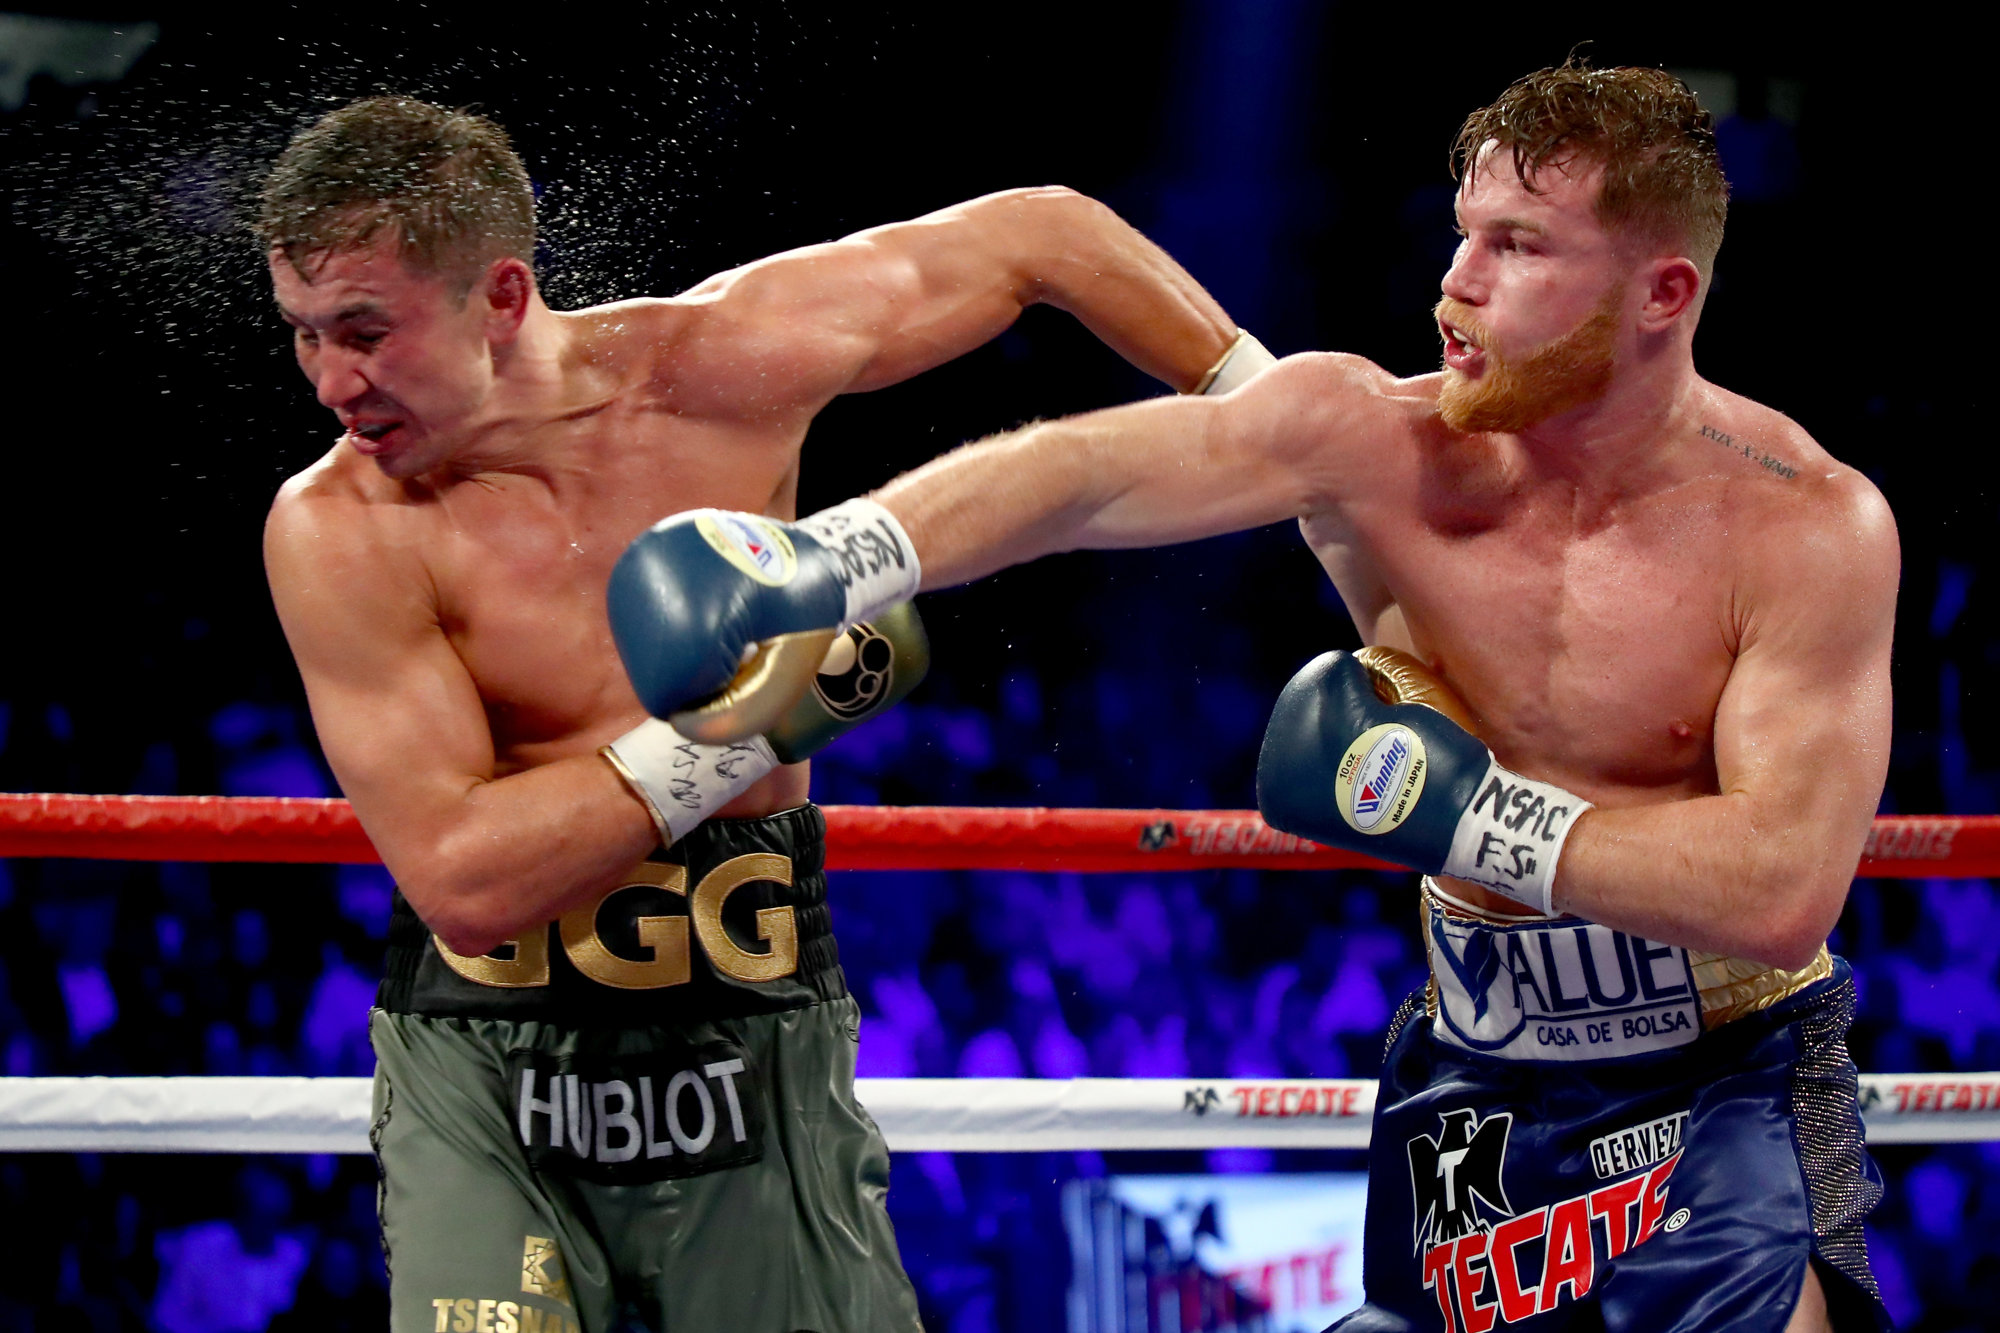 On This Day 'Canelo' And 'GGG' Kick Off One Of Boxing's Greatest